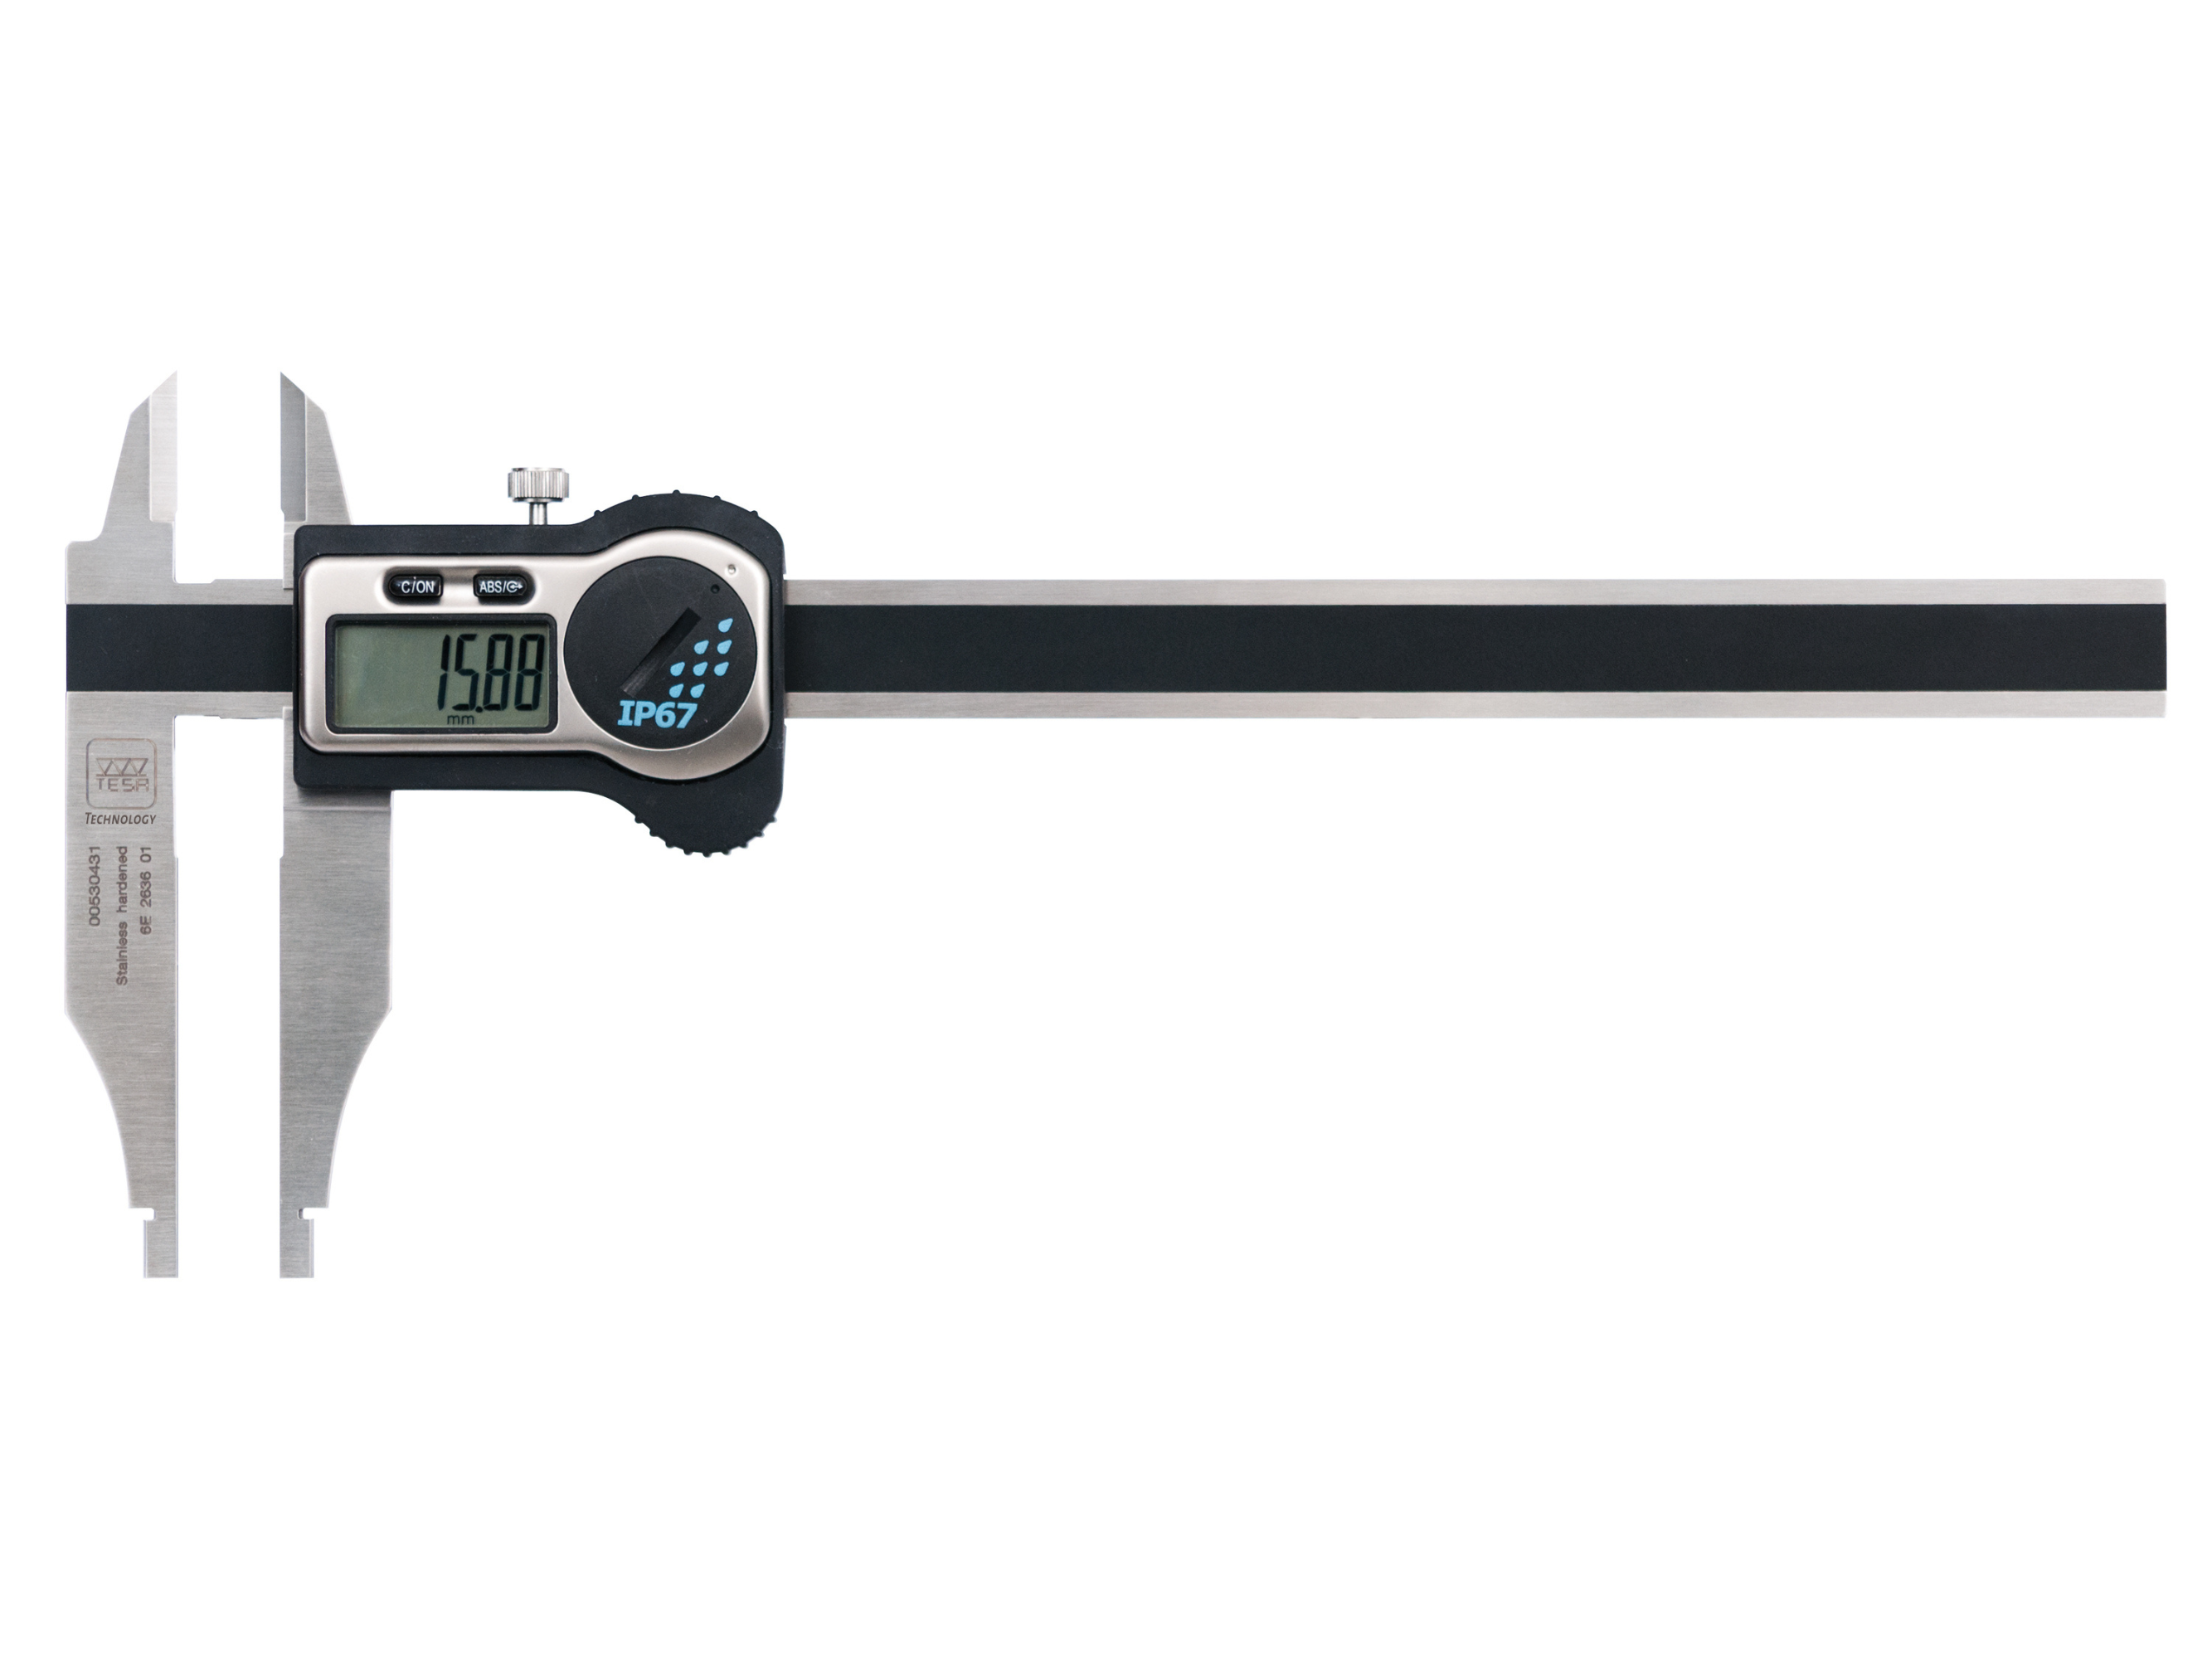 Tesa Digital workshop caliper, with rounded internal measuring faces & knife-edge external jaws, 300 mm 00530433